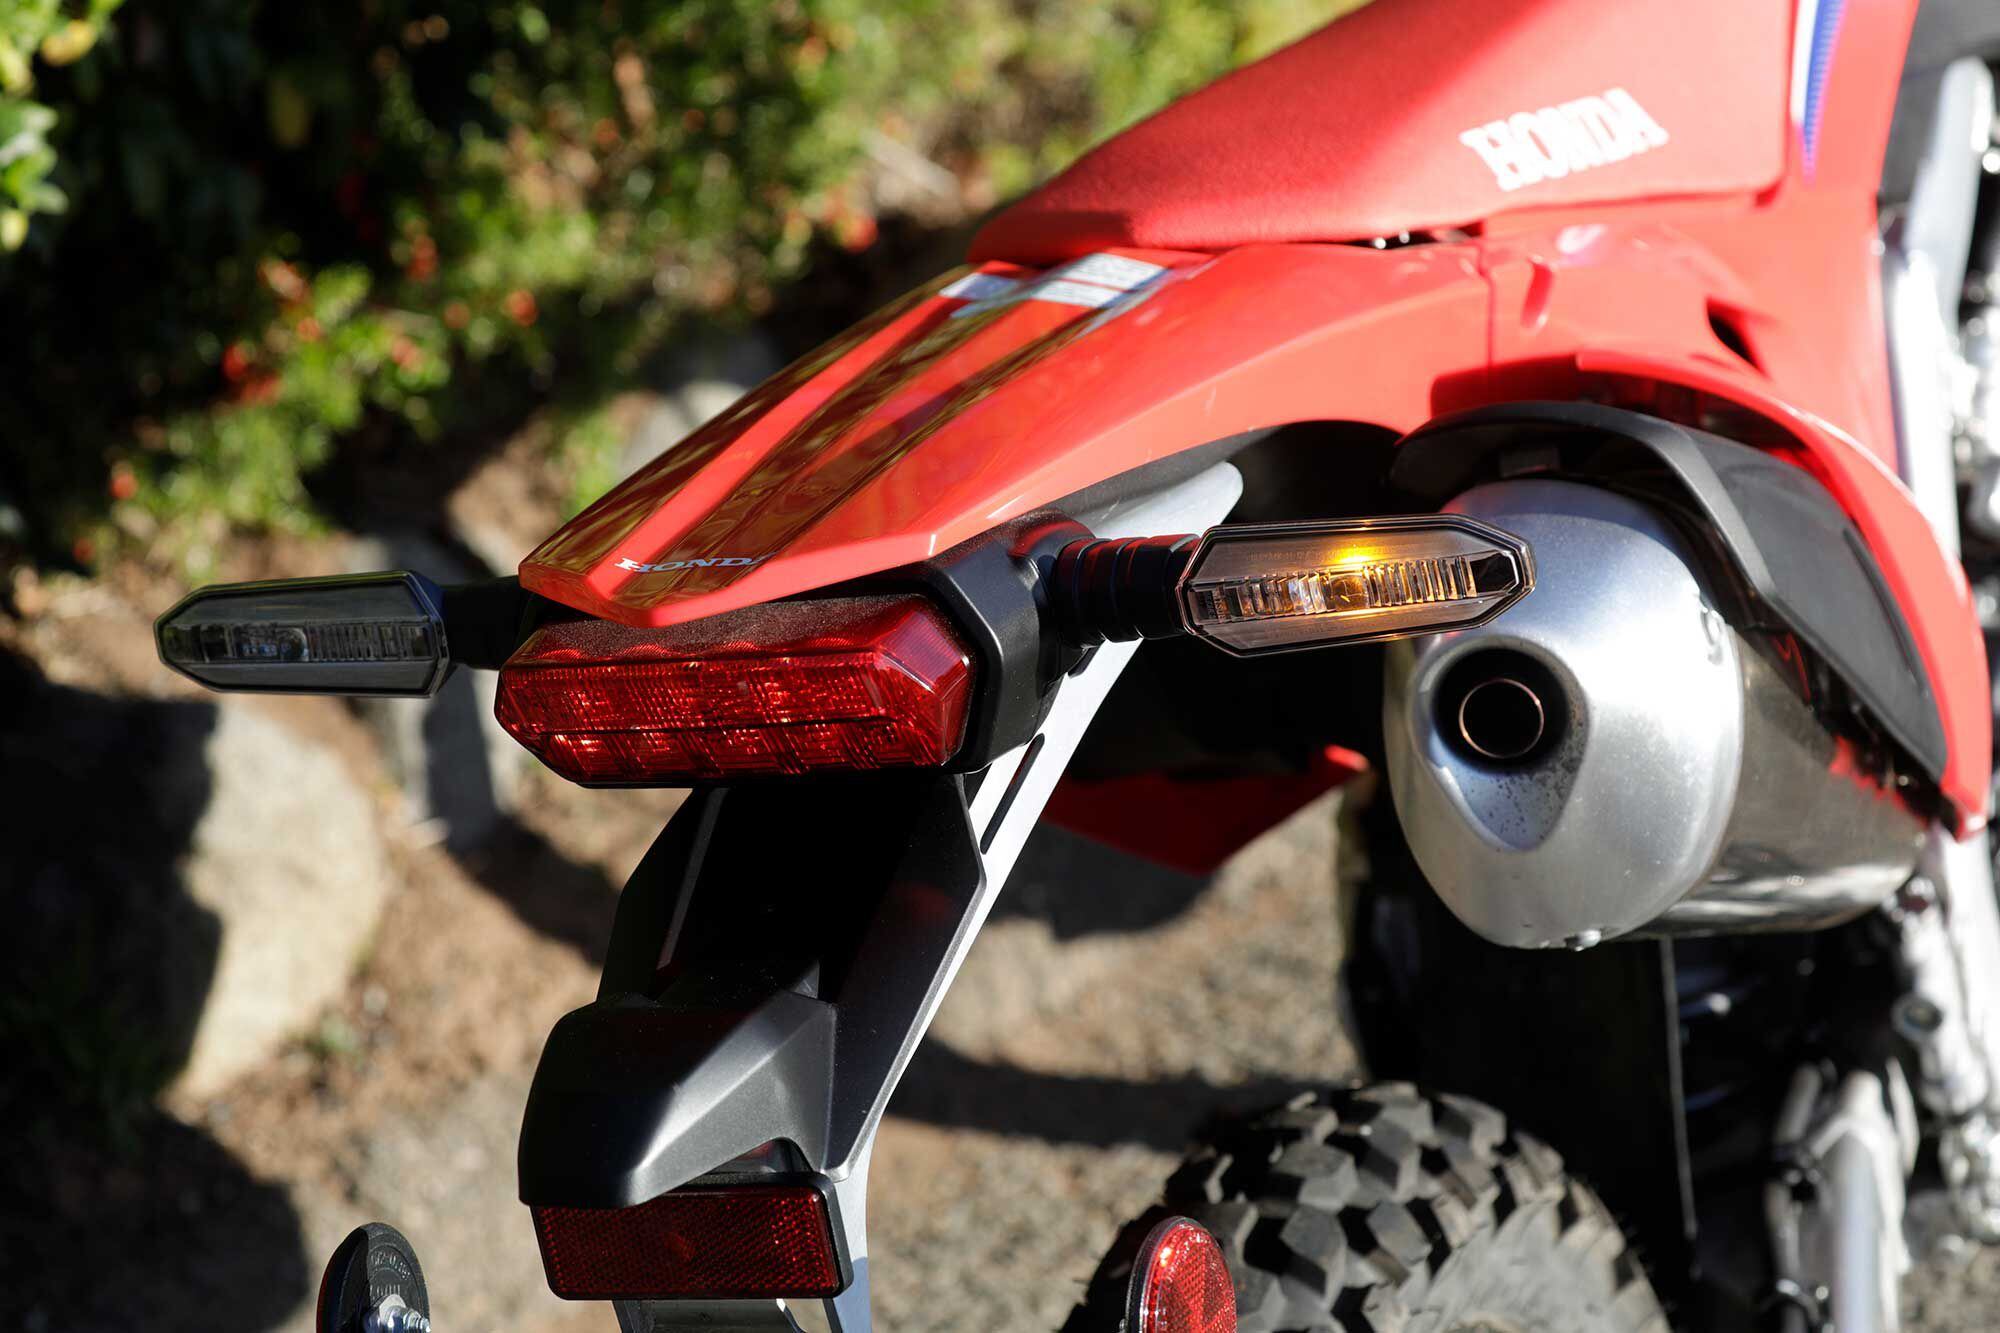 All LED lighting looks modern and helps the CRF450RL rider stand out on the street or dirt.